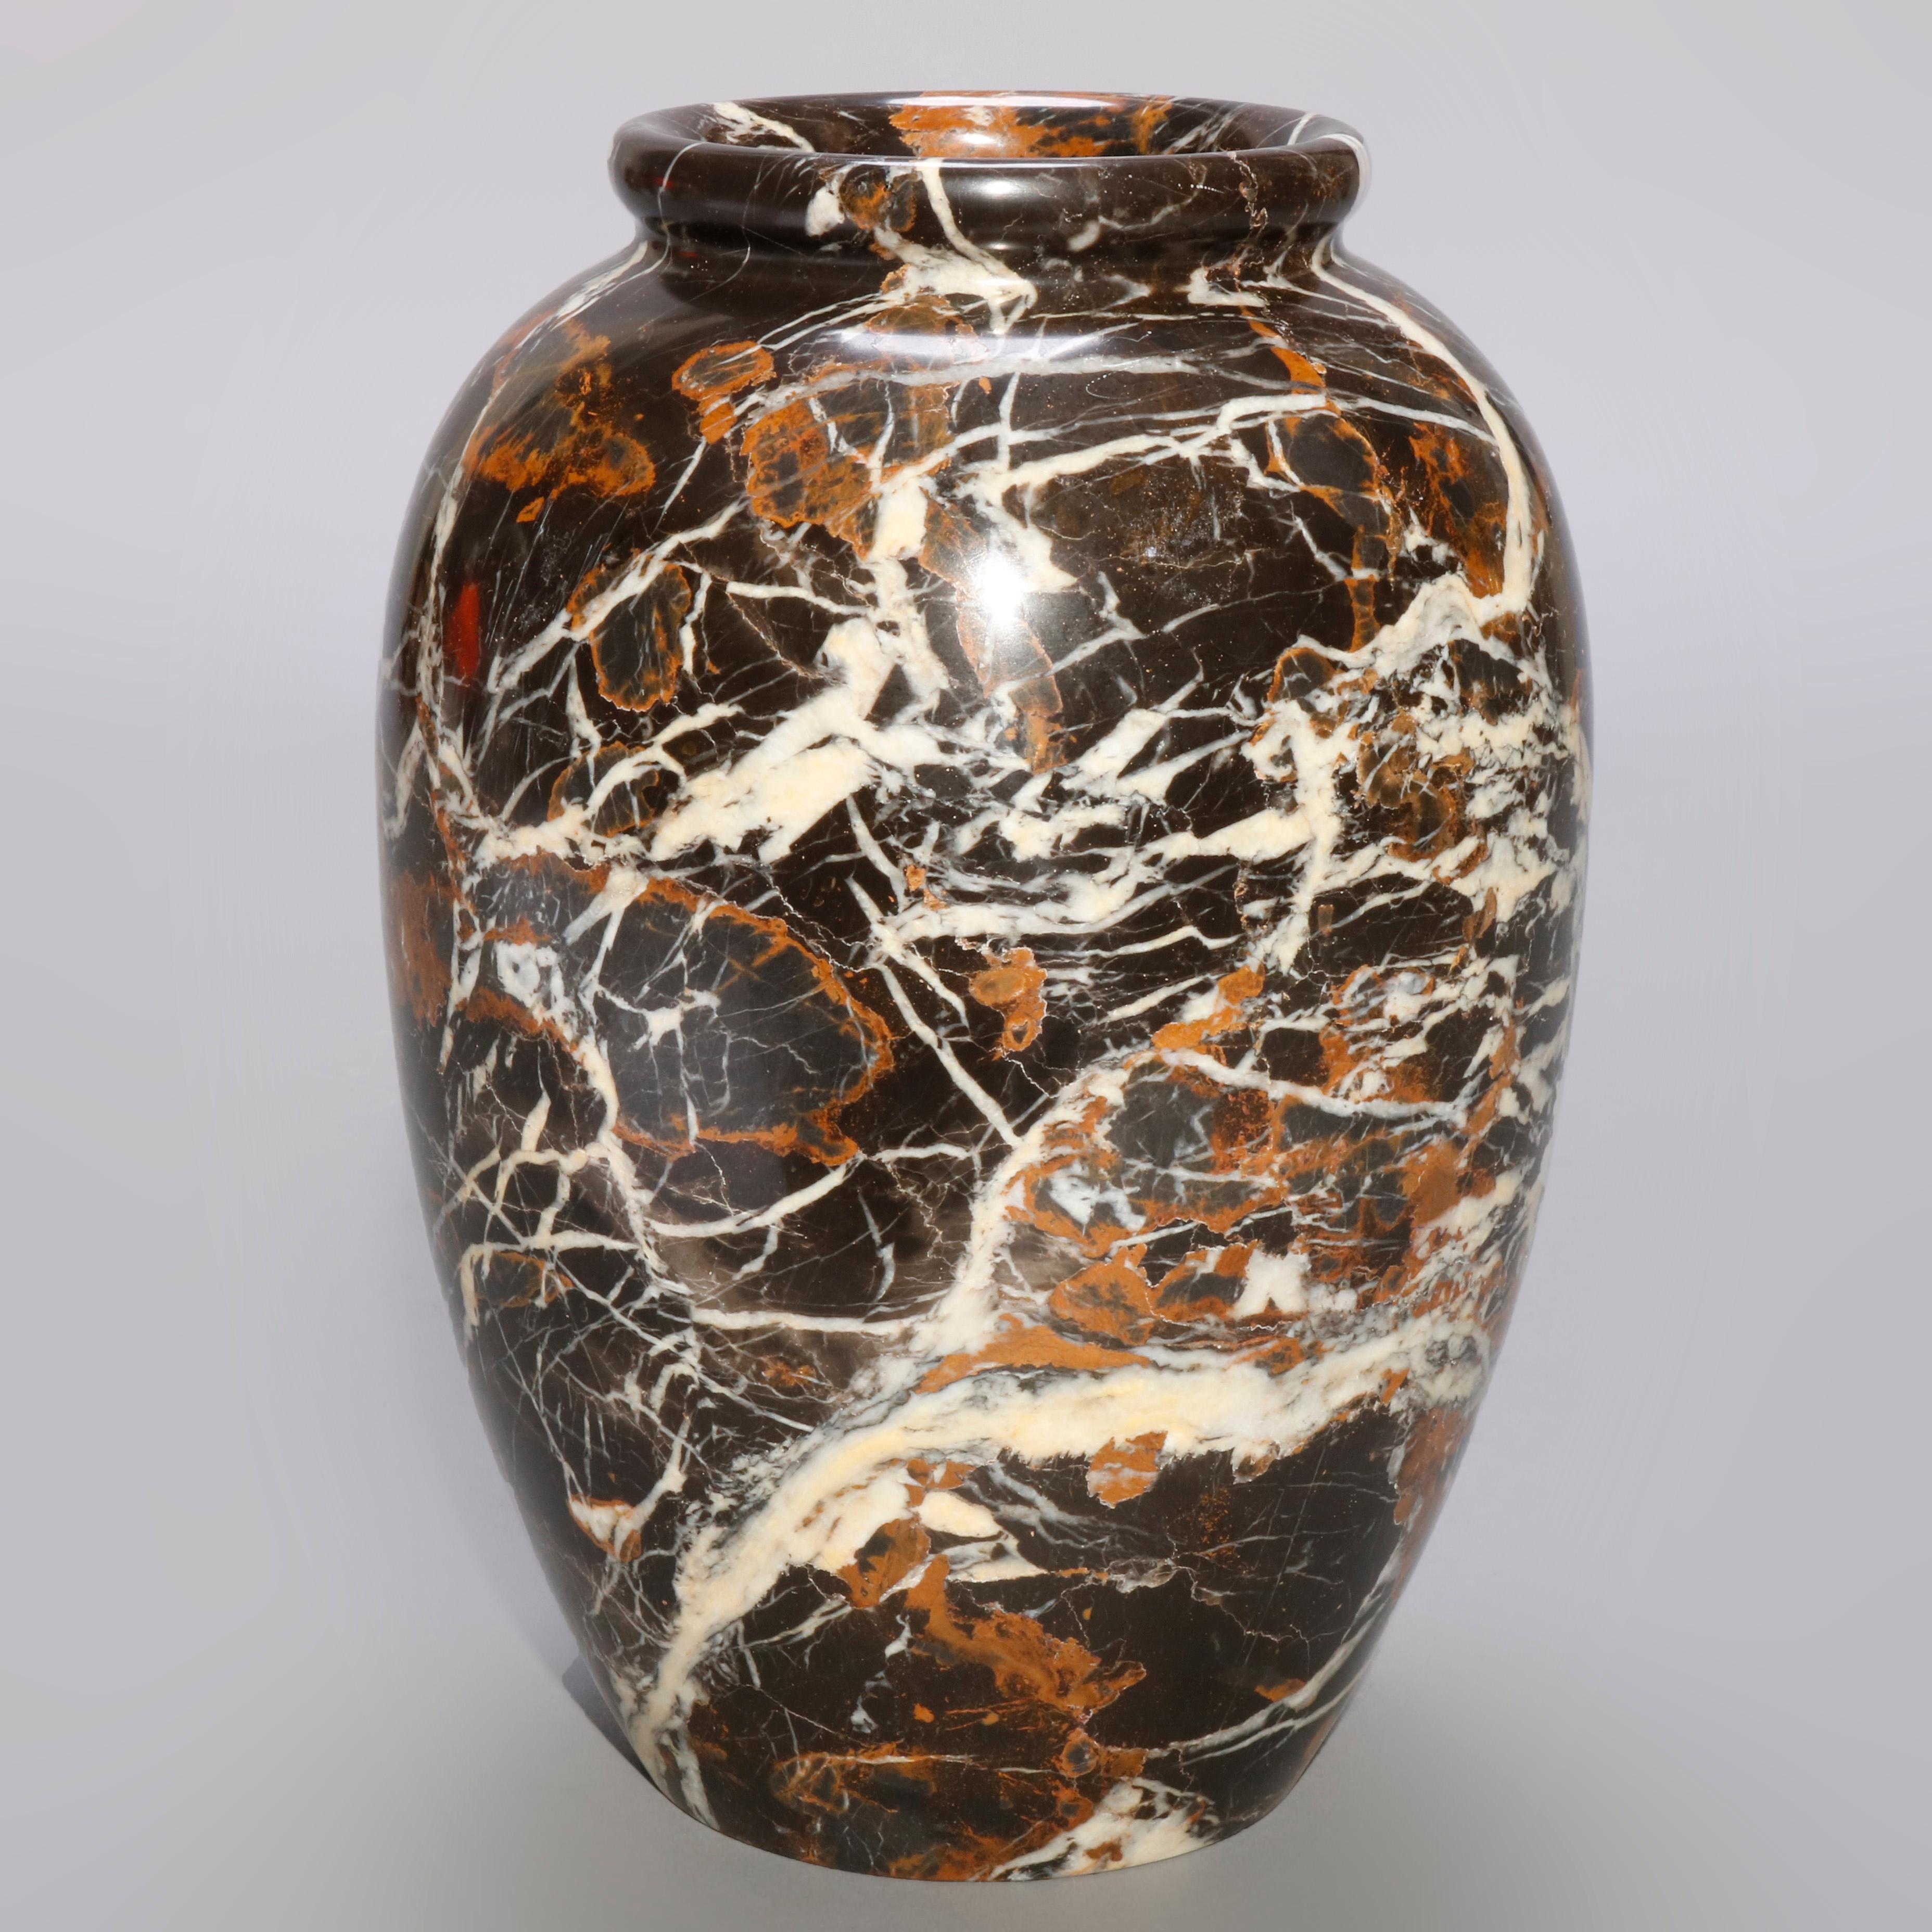 A vintage English vase offers Blue John granite stone construction in urn form, 20th century

Measures: 9.88